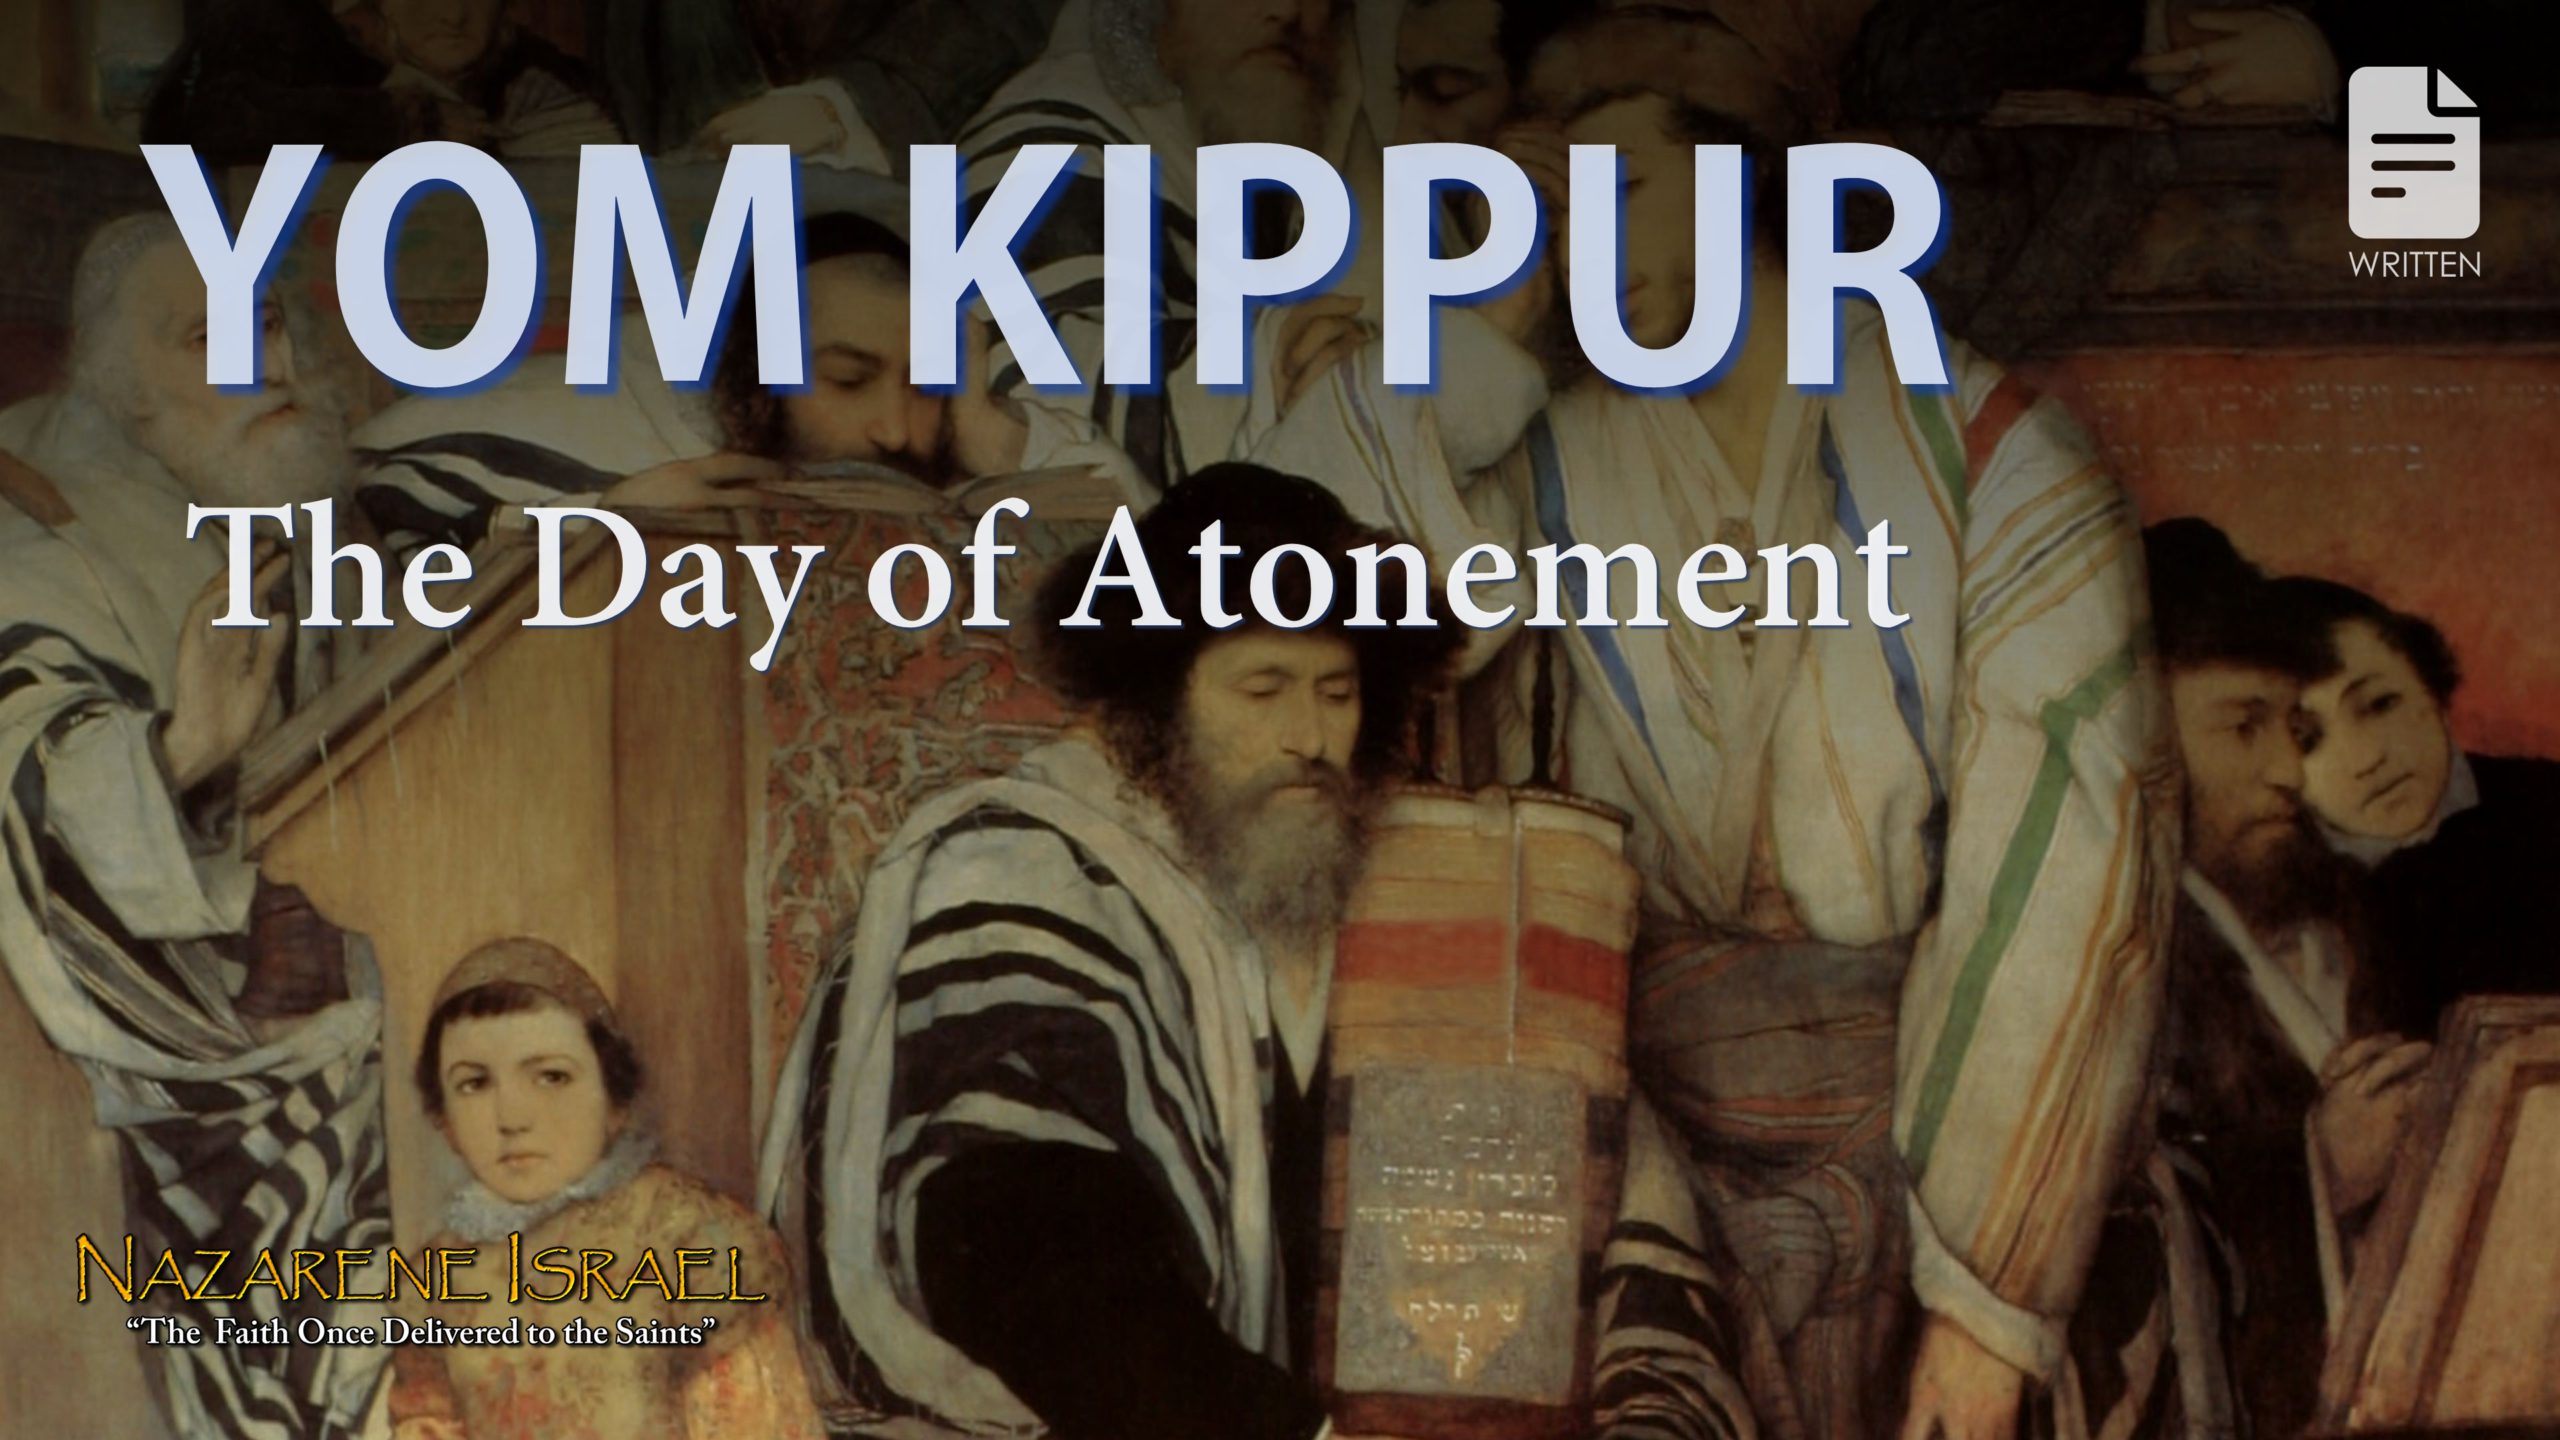 Yom Kippur – The Day of Atonements